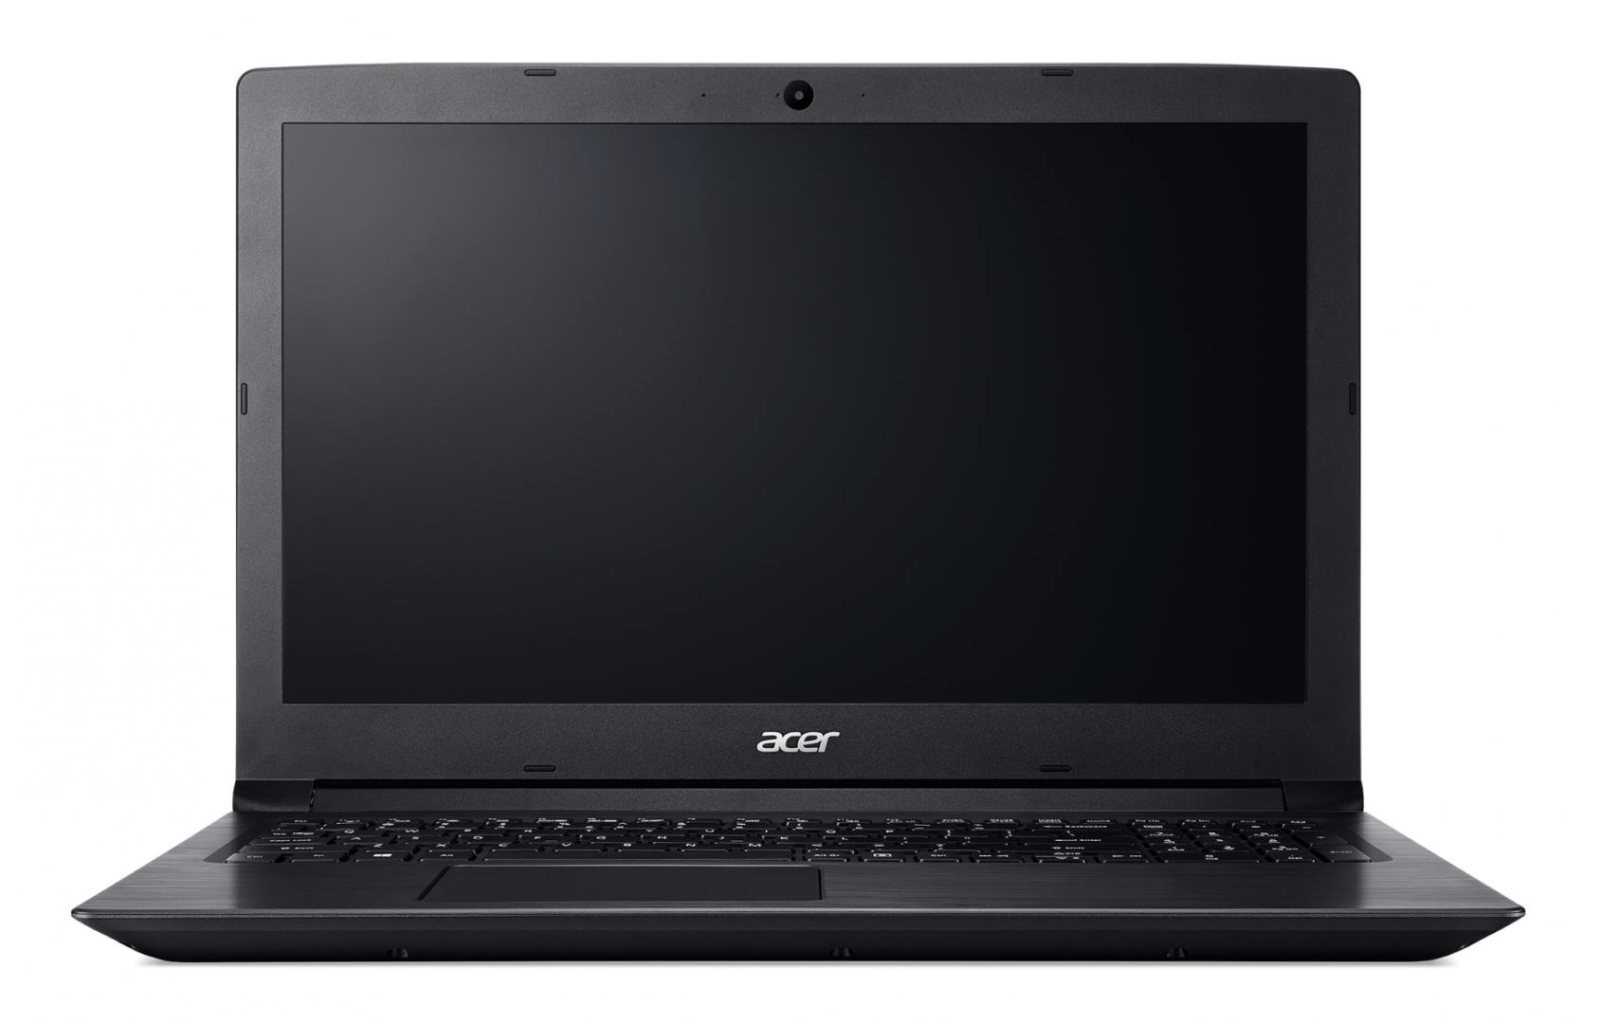 Laptop Acer Aspire 3 A315-53-31YJ, 15.6" FHD Acer ComfyView, Intel Core i3-7020U, RAM 4GB DDR4, SSD 256GB, Boot-up Linux